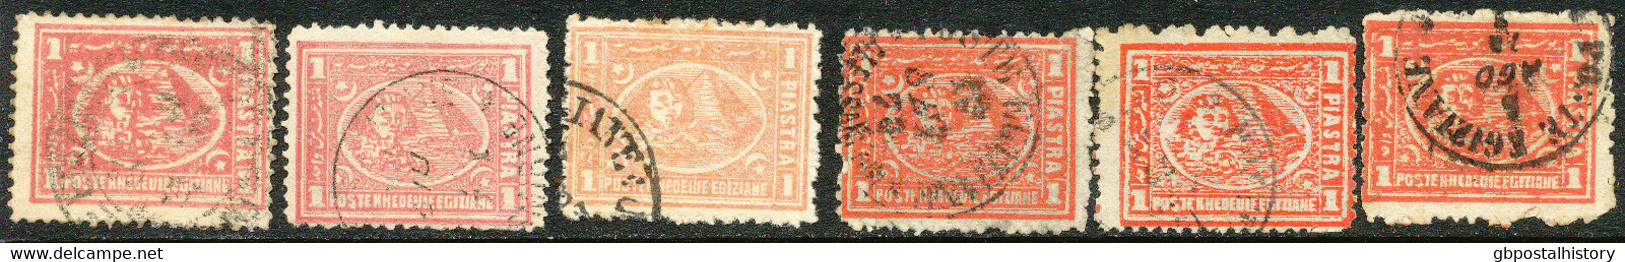 EGYPT 1872 Sphinx Before Cheopspyramide 1 Pia From Pink (3) To Brickred (11) VFU - 1866-1914 Ägypten Khediva